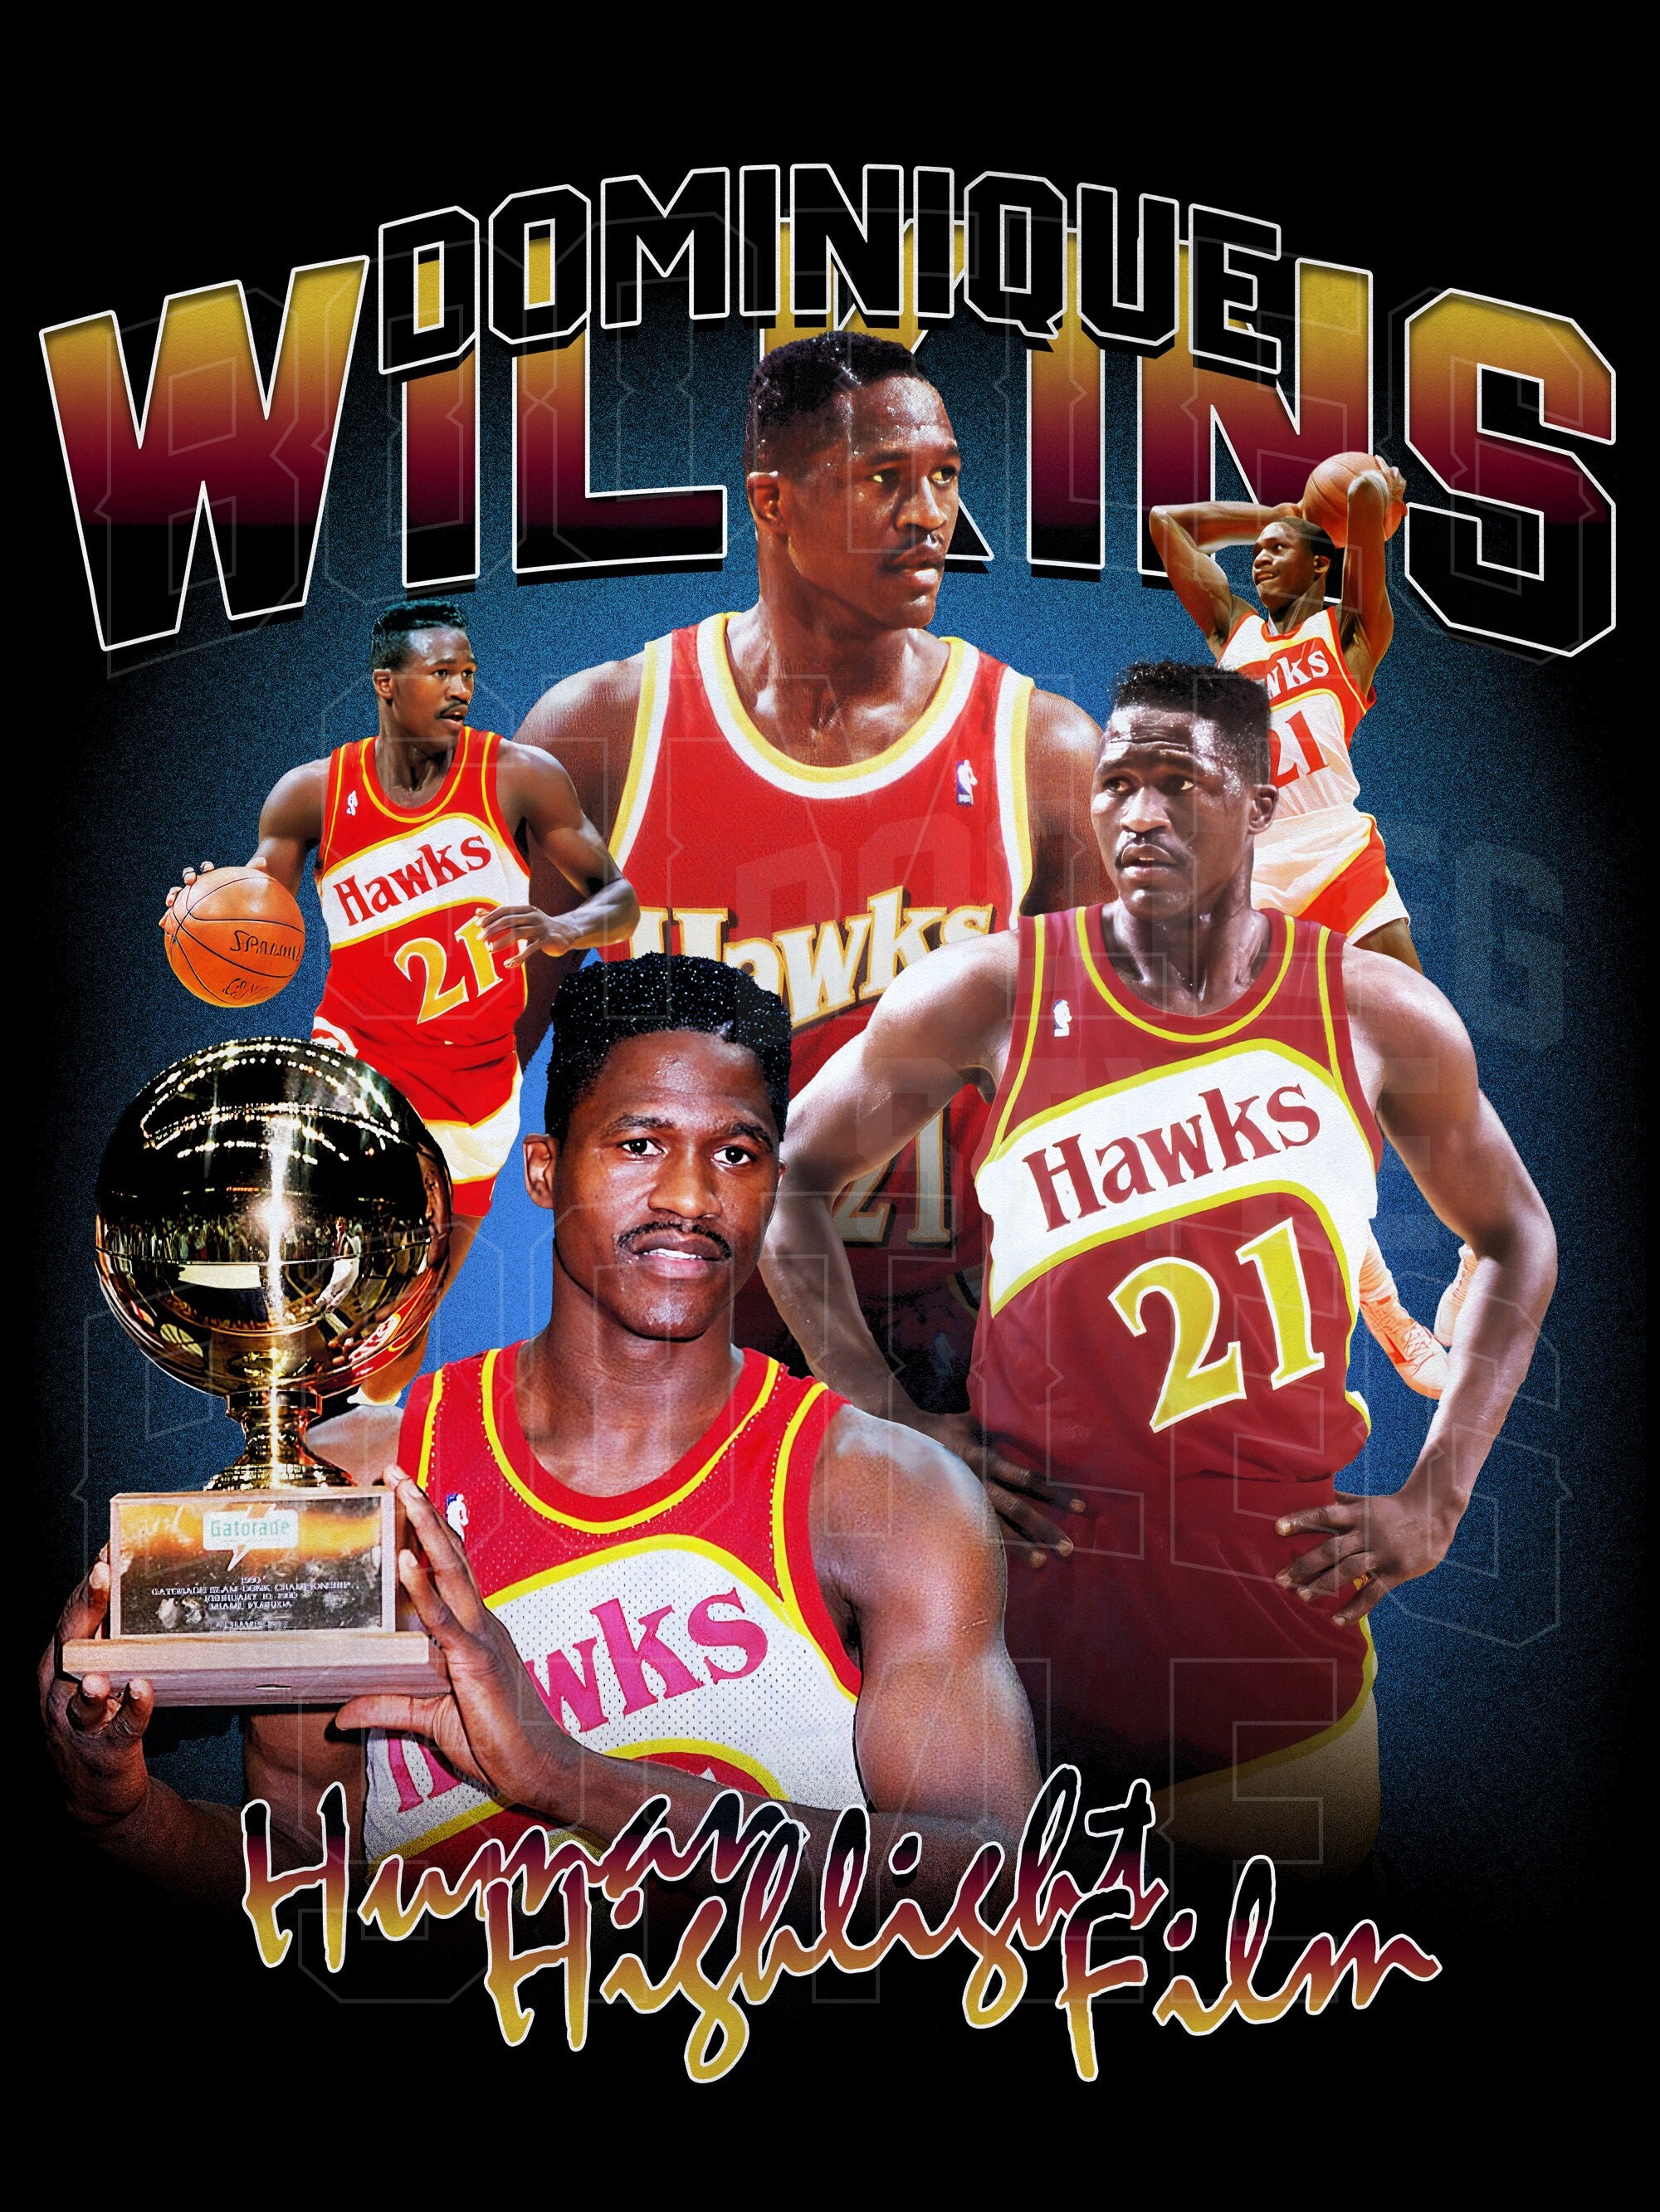 Retro Dominique Wilkins Trading Card - Basketball - Posters and Art Prints